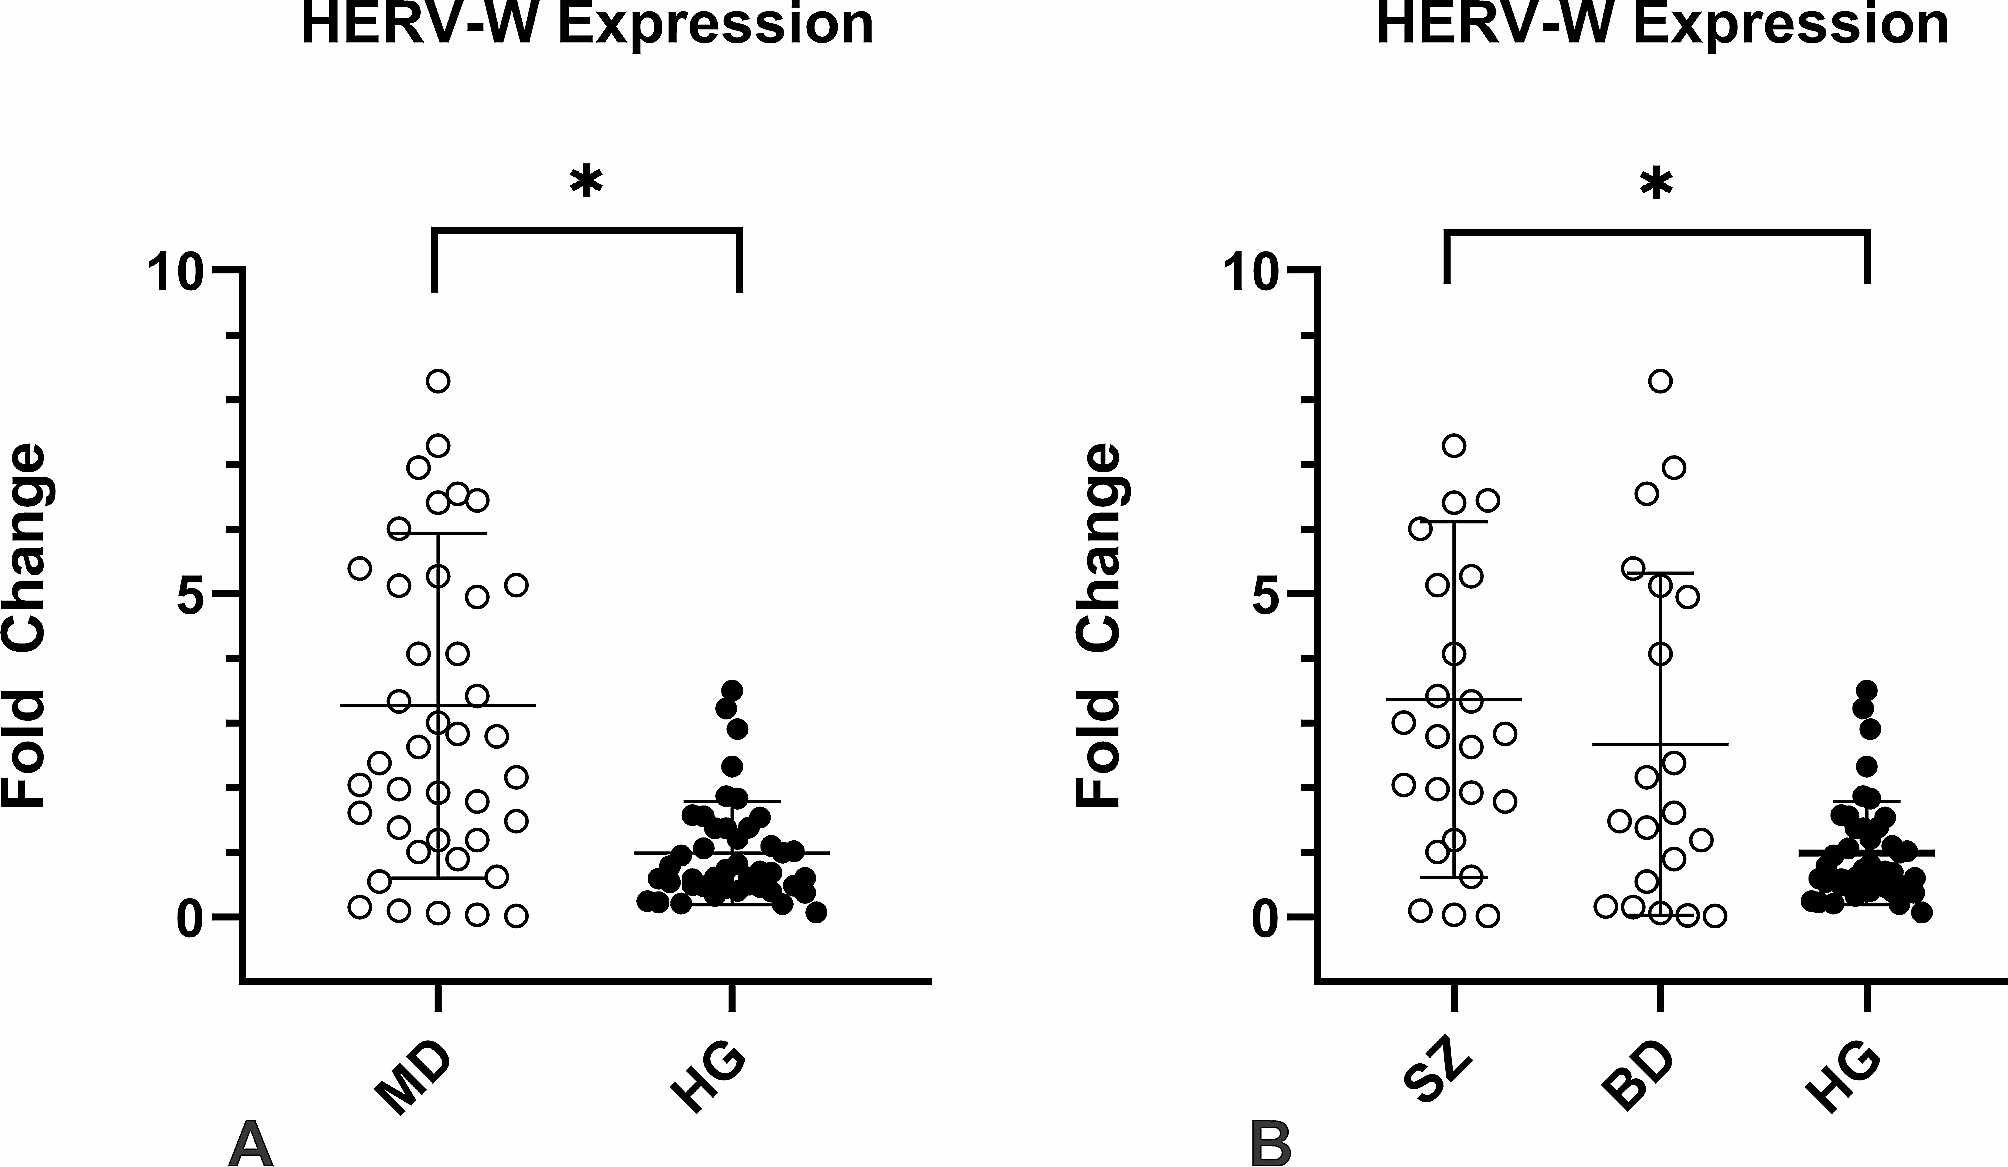 HERV-W upregulation expression in bipolar disorder and schizophrenia: unraveling potential links to systemic immune/inflammation status